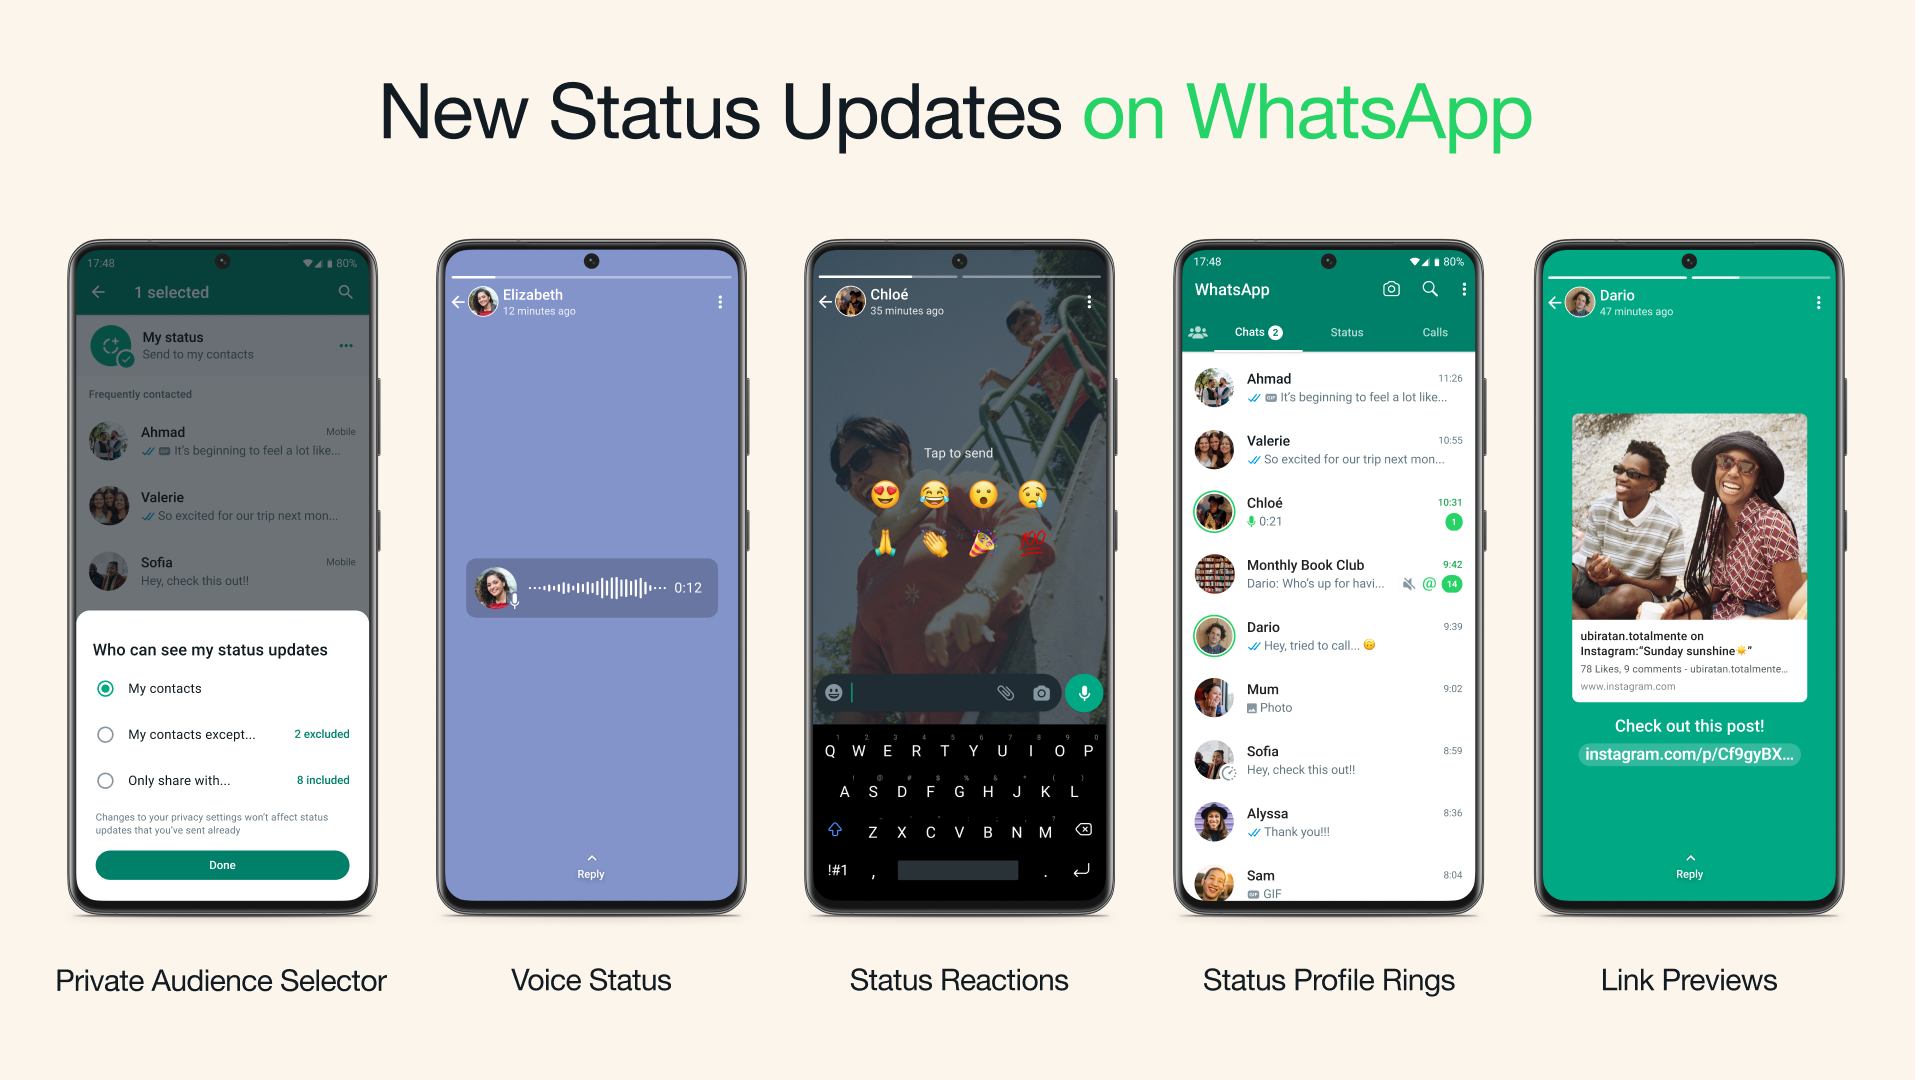 WhatsApp adds new features to status updates on iOS, Android